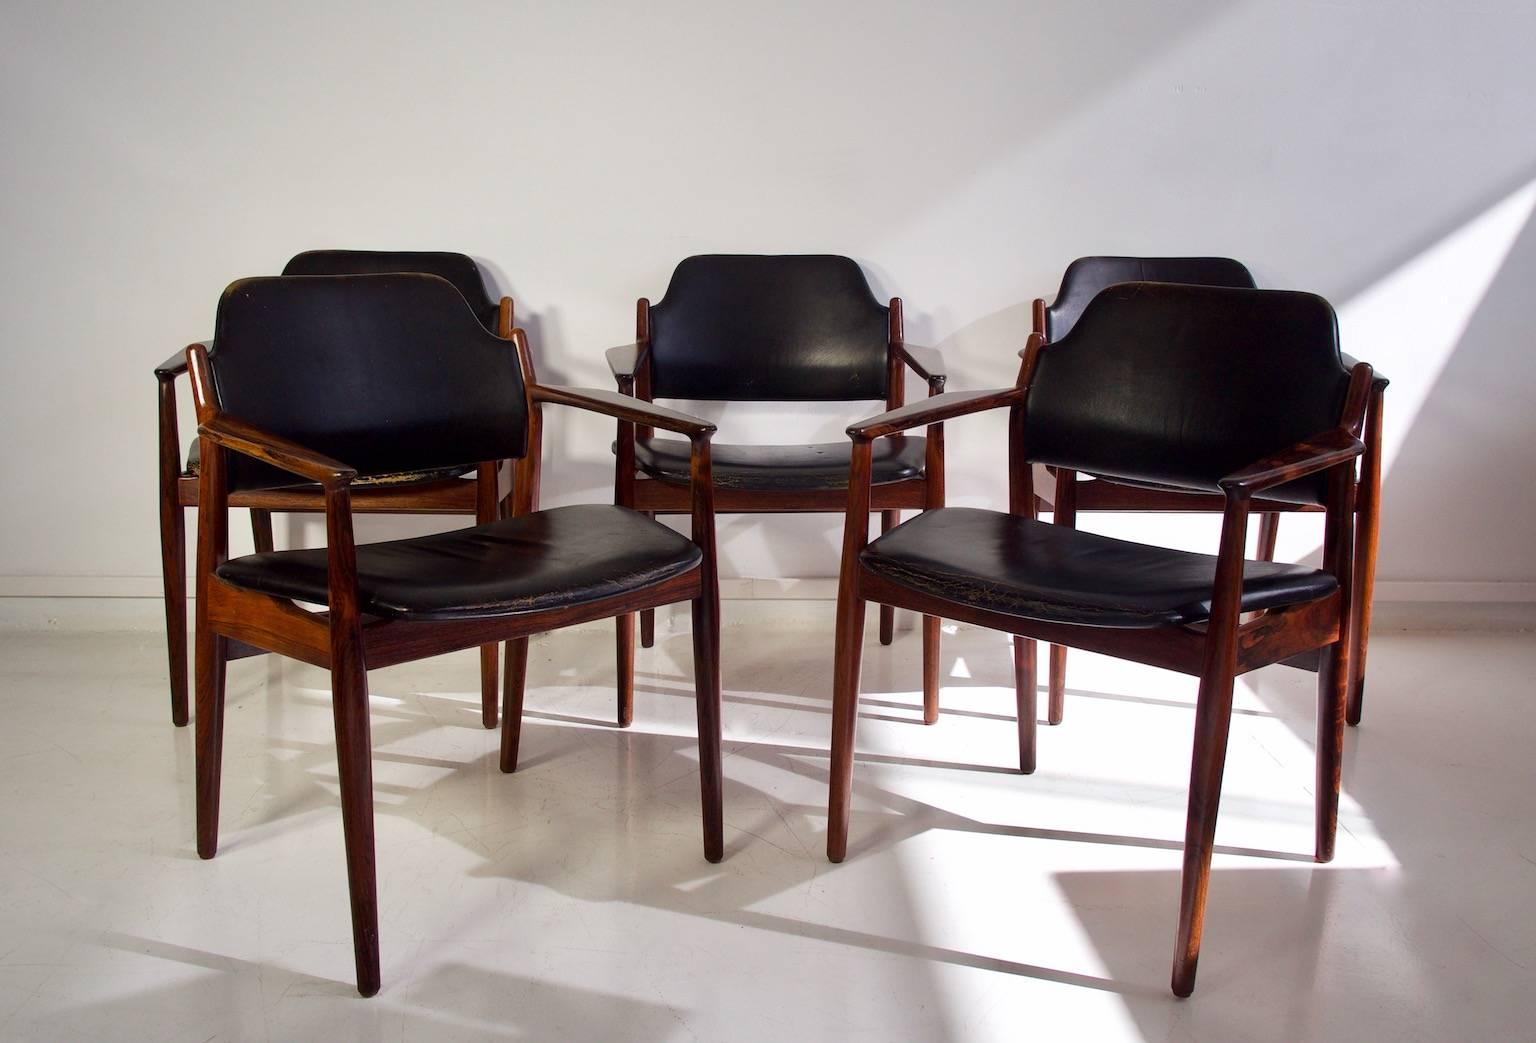 Arne Vodder armchairs with solid rosewood frame and black leather upholstery. Designed in 1961 and produced by Sibast Mobler, model 62A. Renewed rosewood frame. Leather in great vintage condition with some cracks as seen on photos.